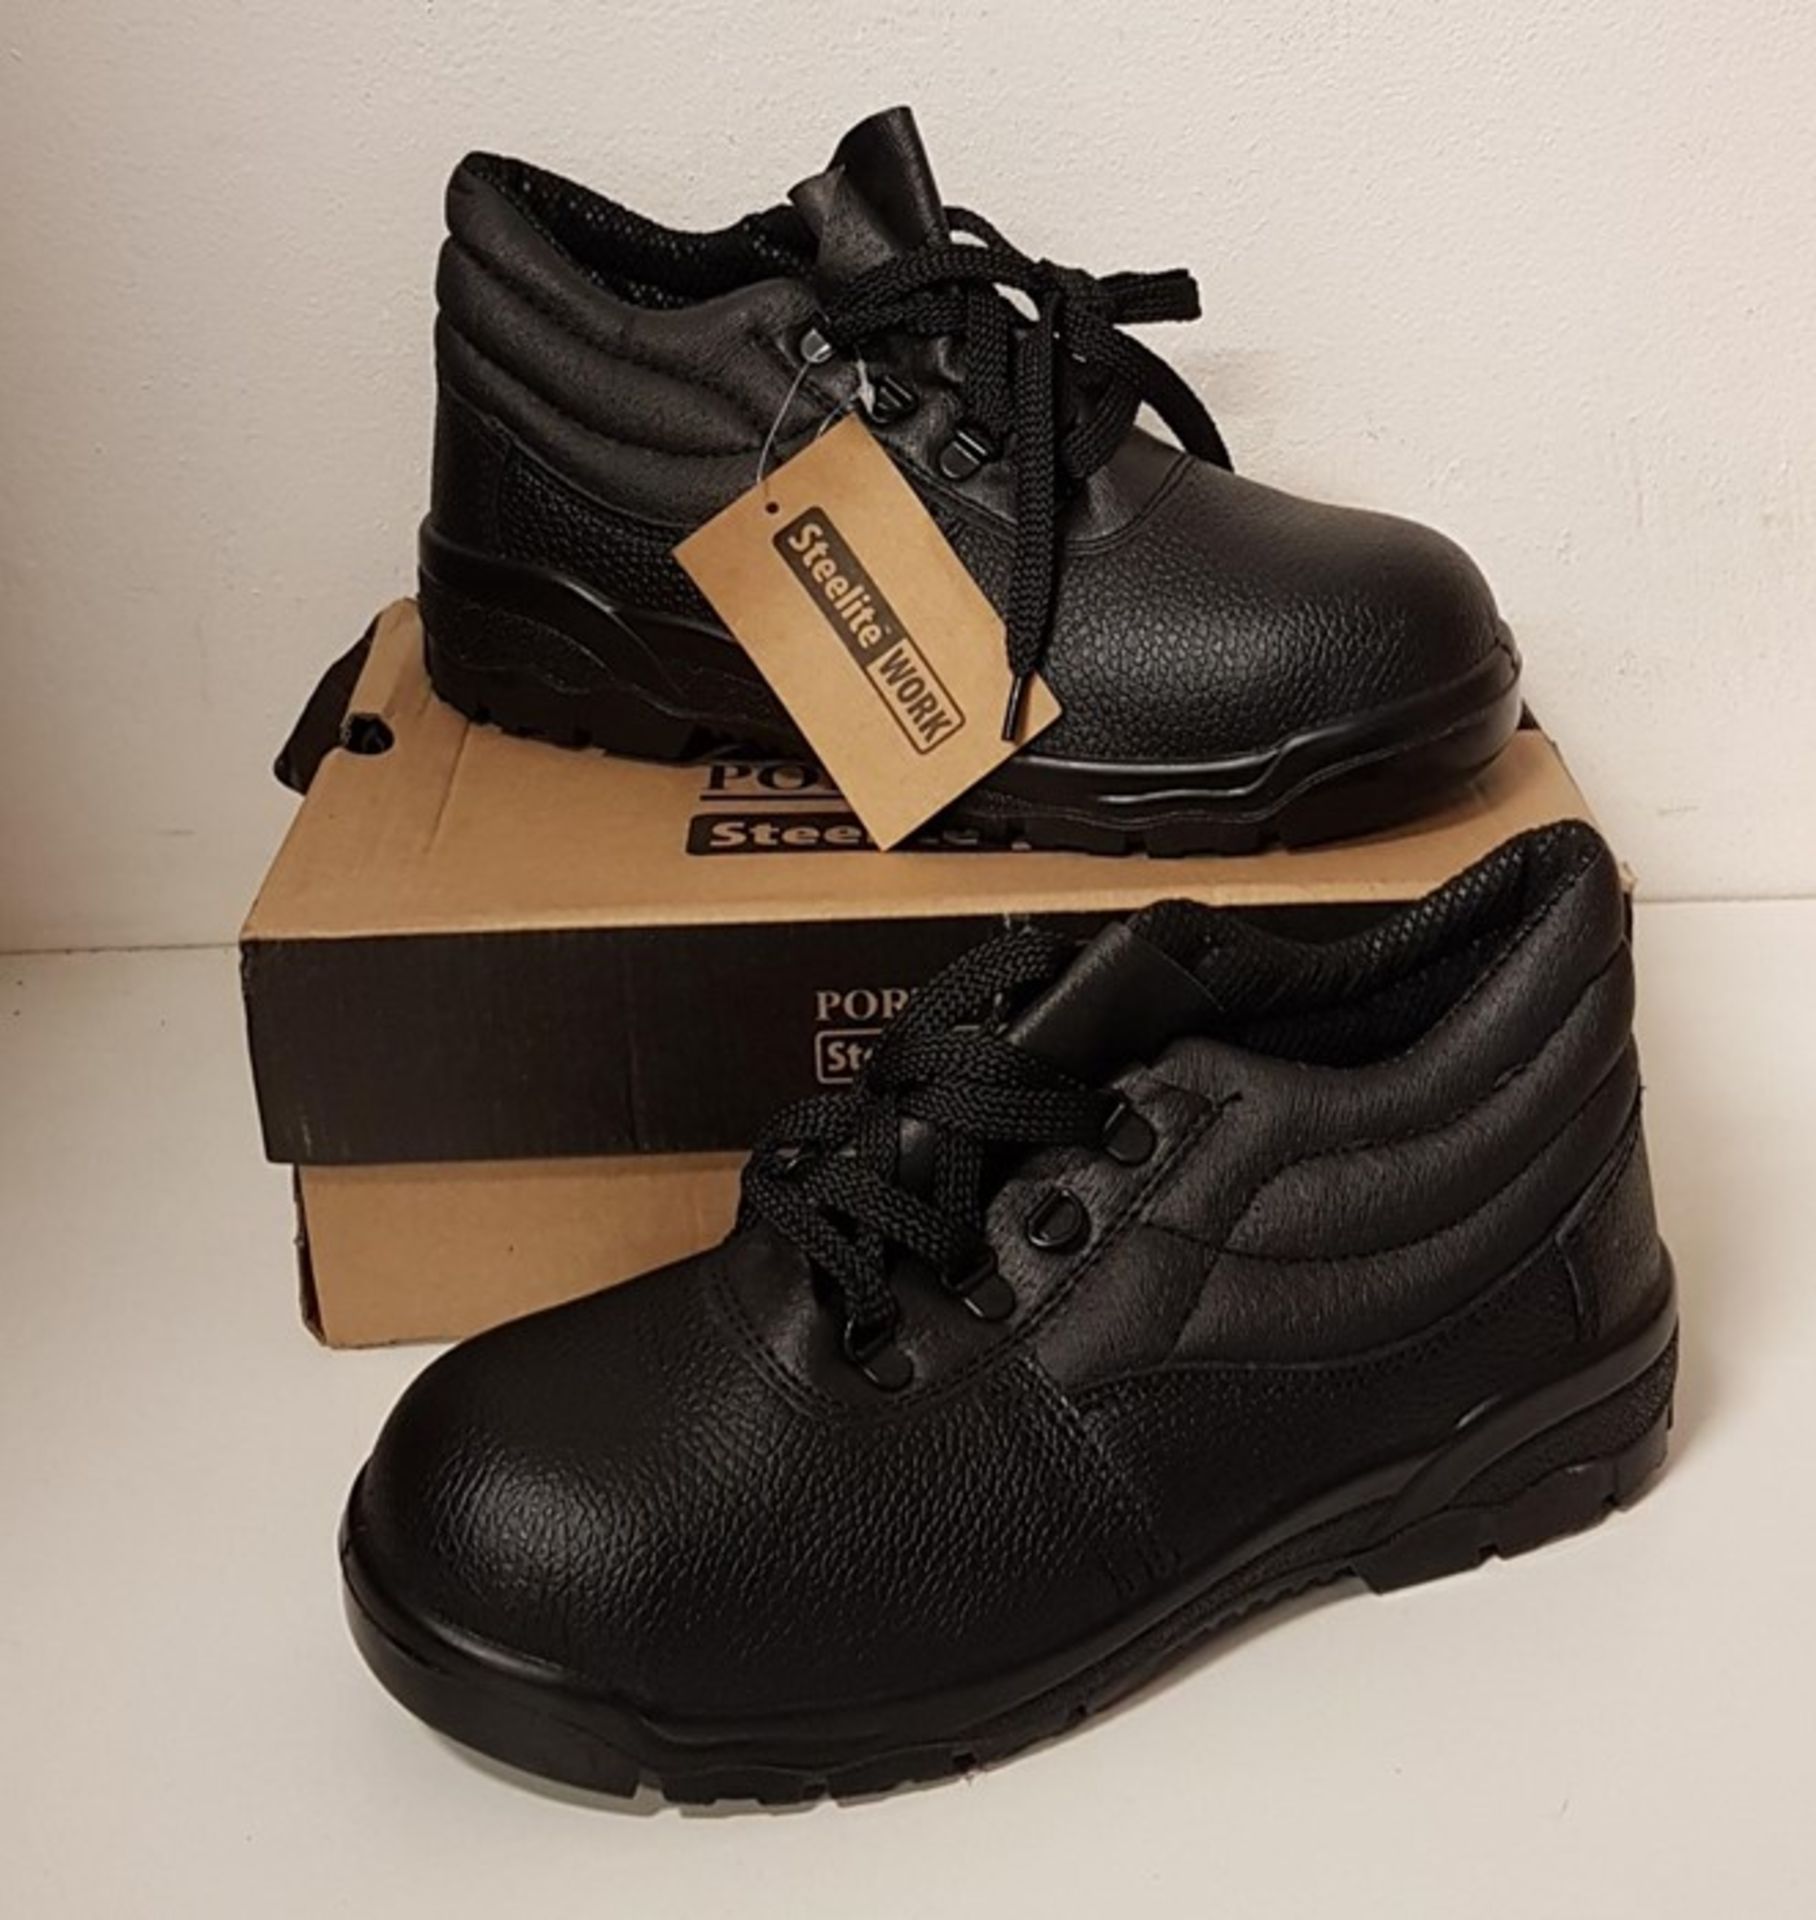 1 BOXED PAIR OF PORTWEST STEELITE WORK SAFETY BOOTS IN BLACK, SIZE 8 (VIEWING HIGHLY RECOMMENDED)